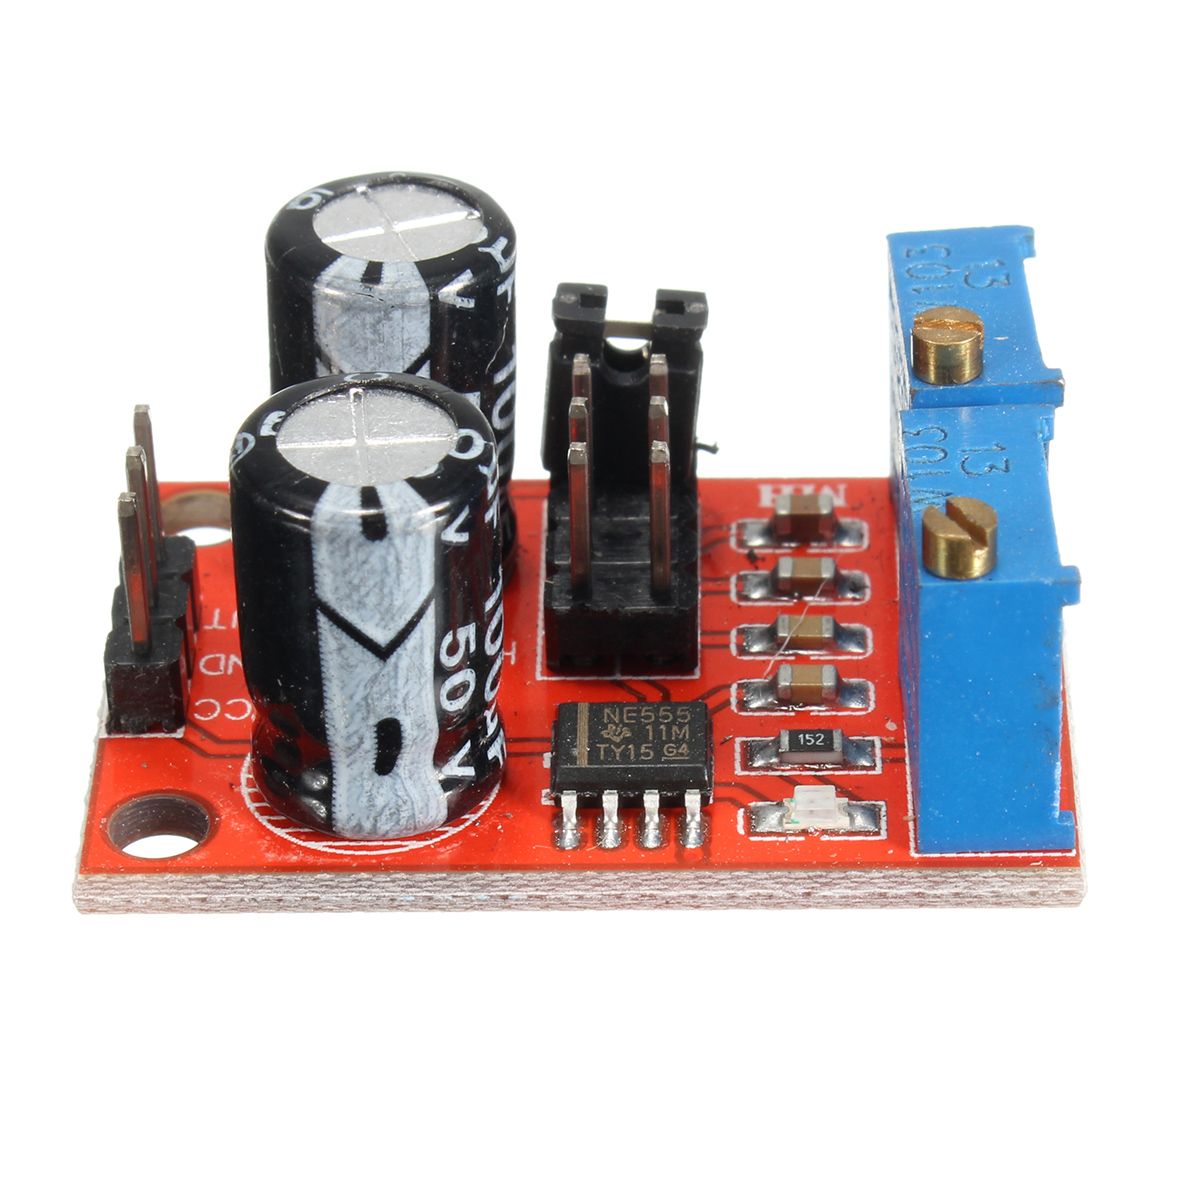 10pcs-NE555-Pulse-Frequency-Duty-Cycle-Adjustable-Module-Square-Wave-Signal-Generator-Stepper-Motor--1171962